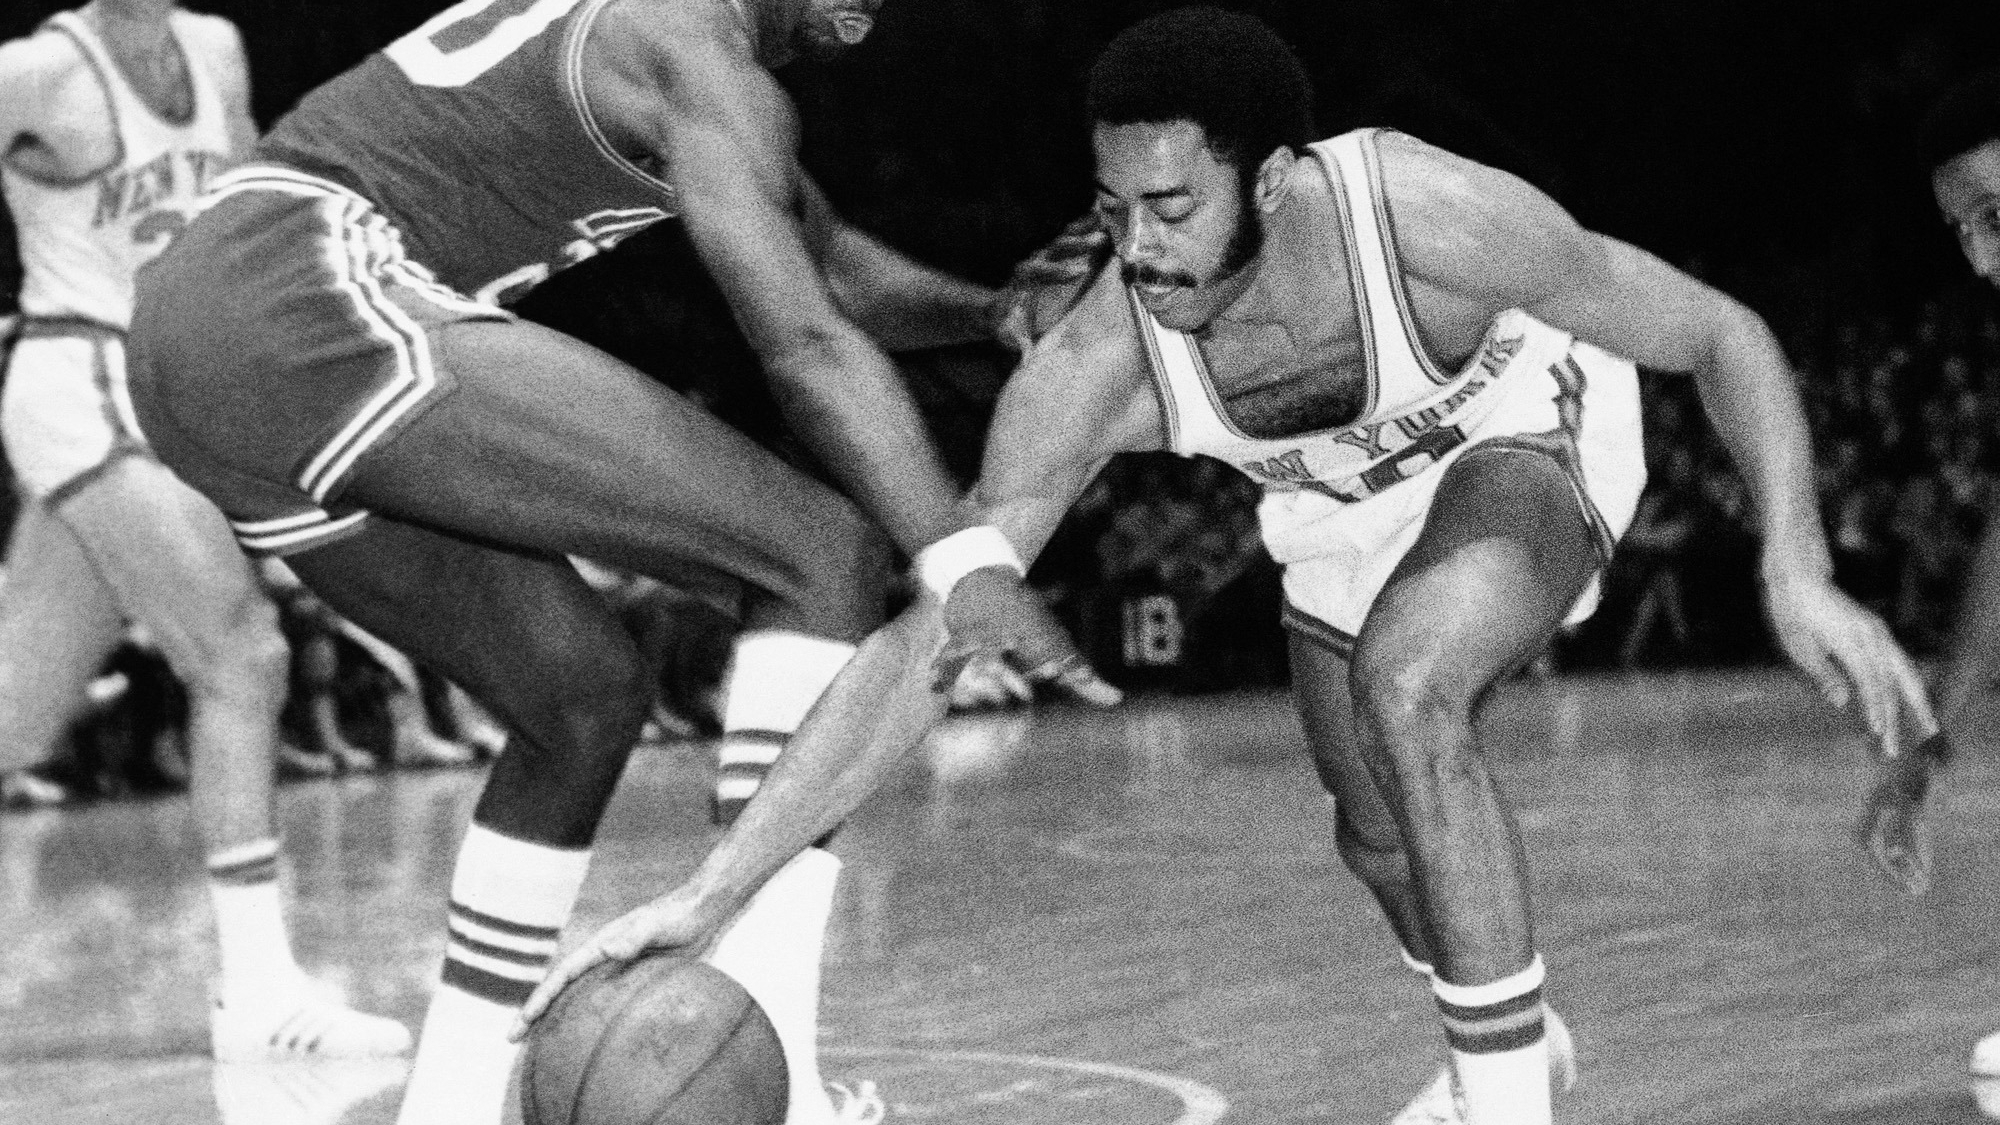 Knickerbocker Walt Frazier, 19, recovers loose ball during first period of game against Detroit in Madison Square Garden, New York, Thursday, Jan. 29, 1970. Contesting is Otto Moore, 20. (AP Photo)